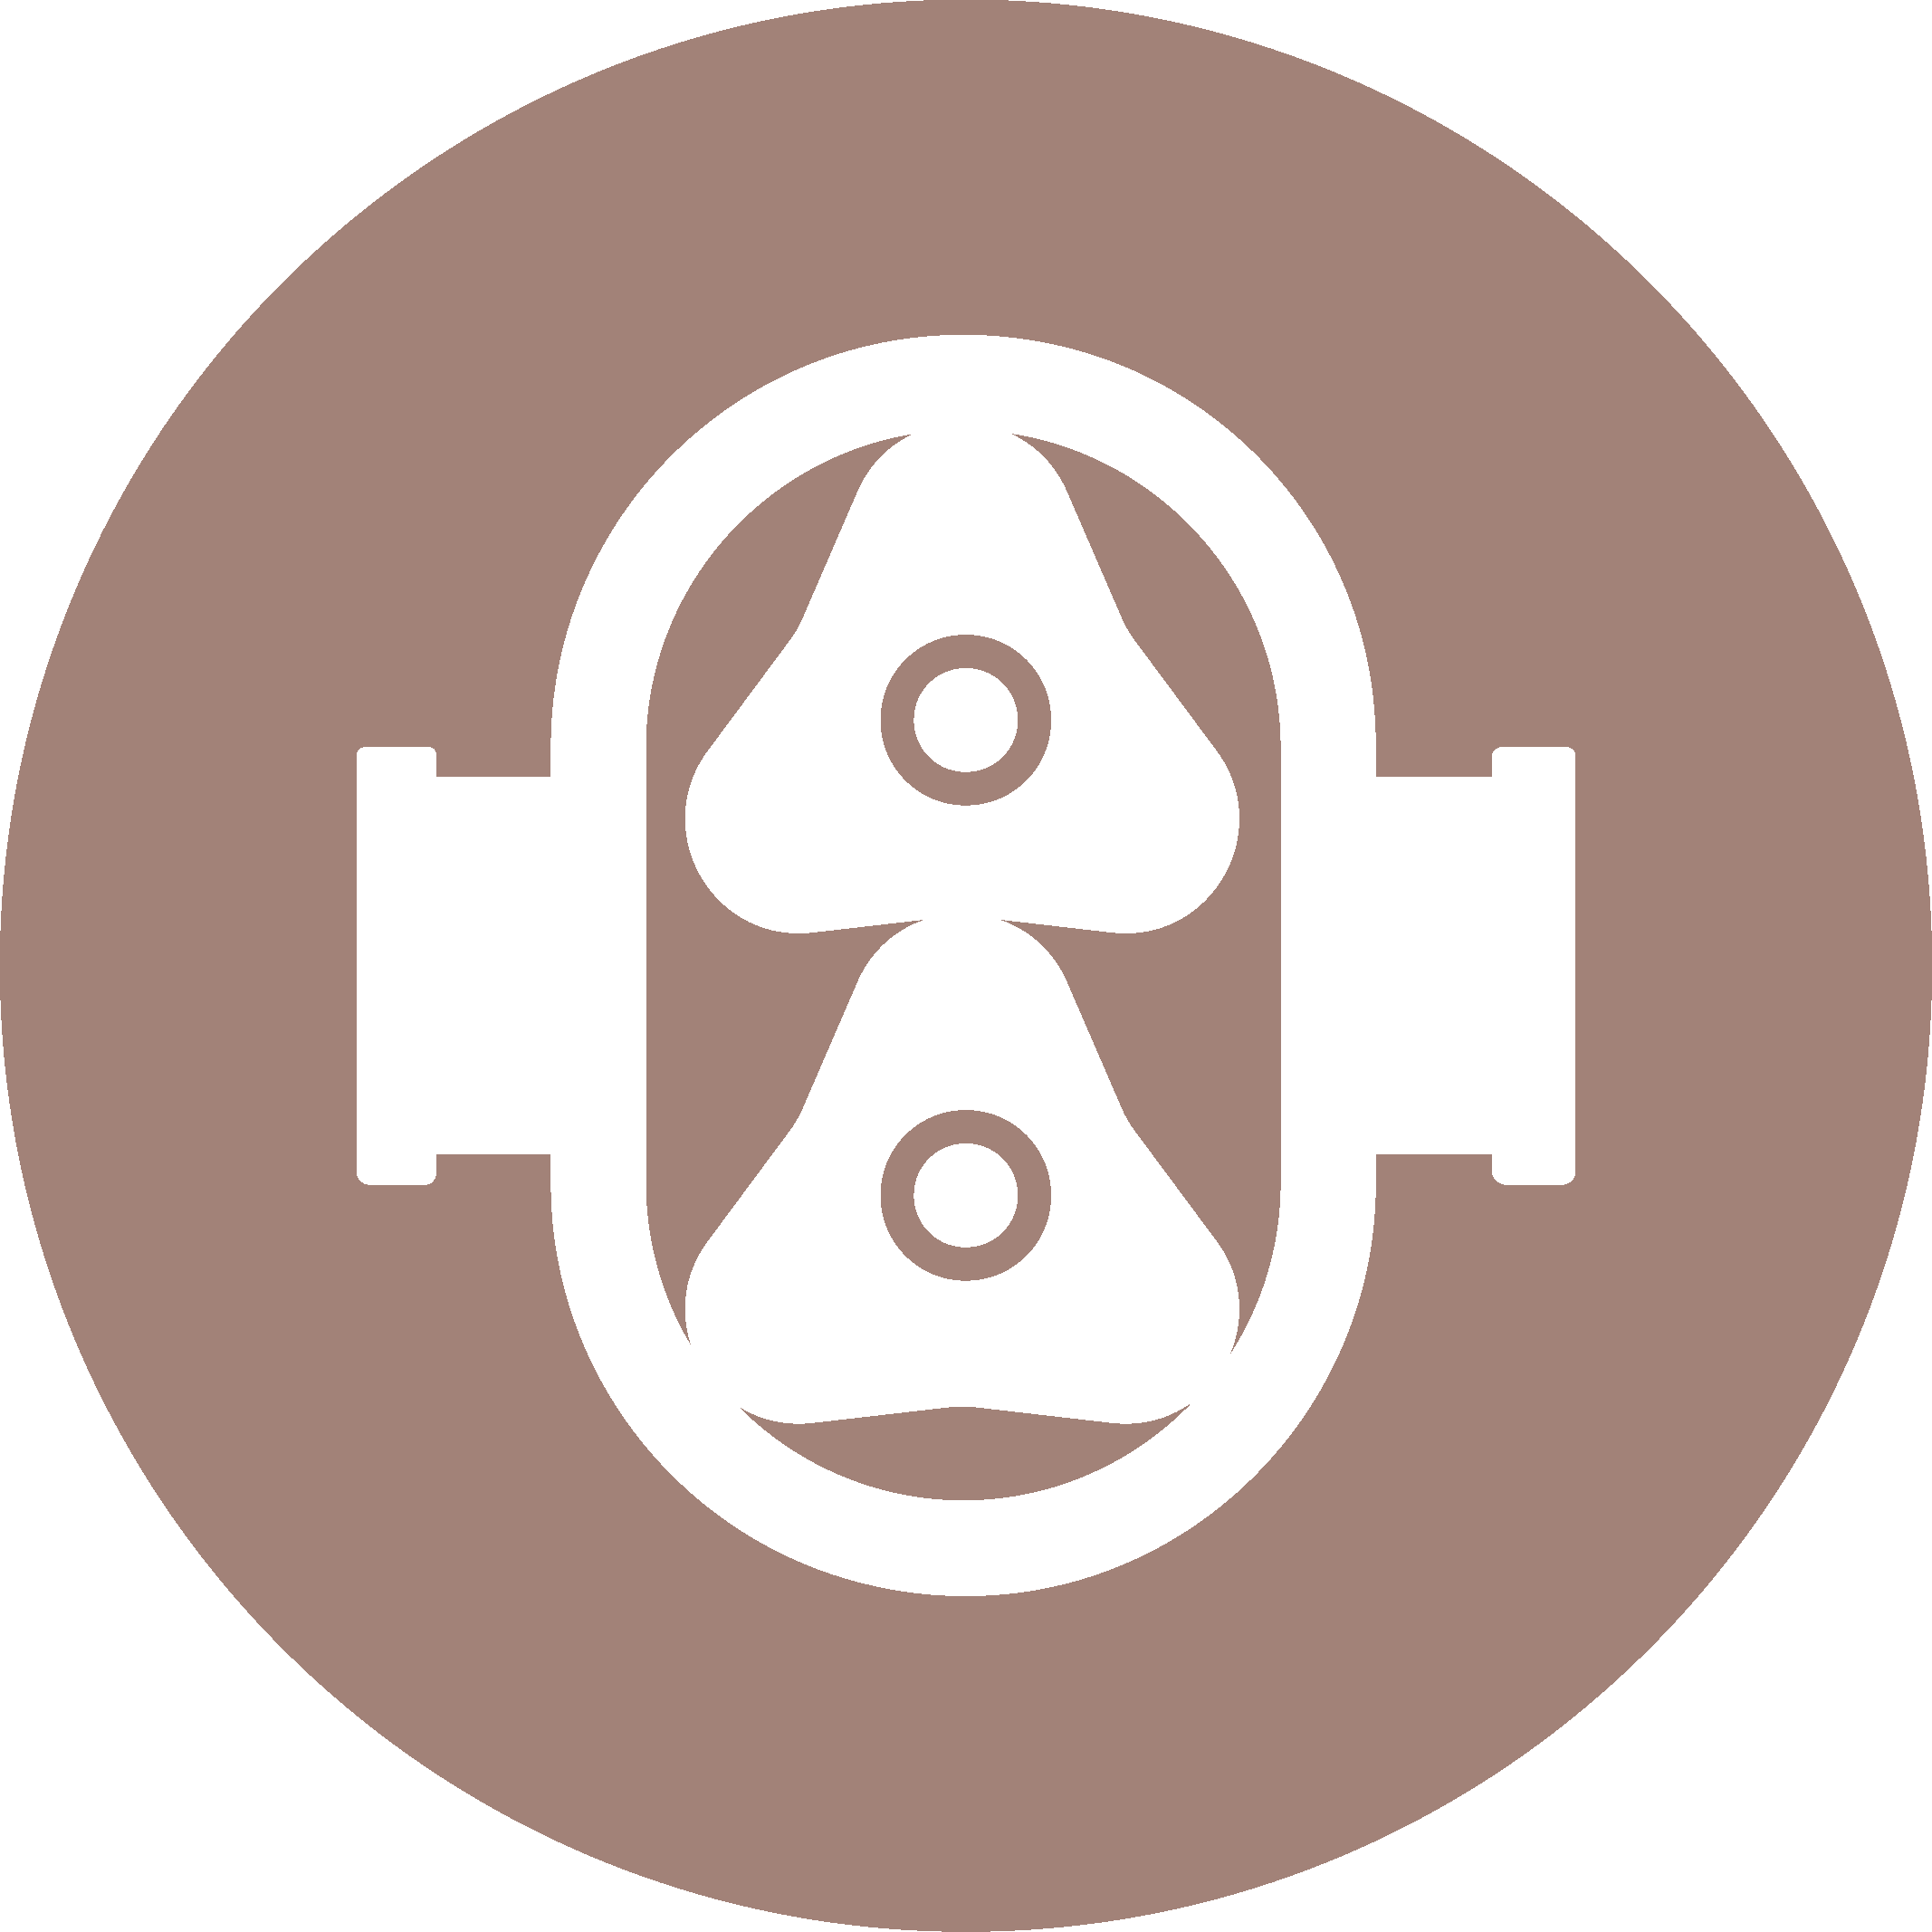 Icon showing a rotary lobe pump